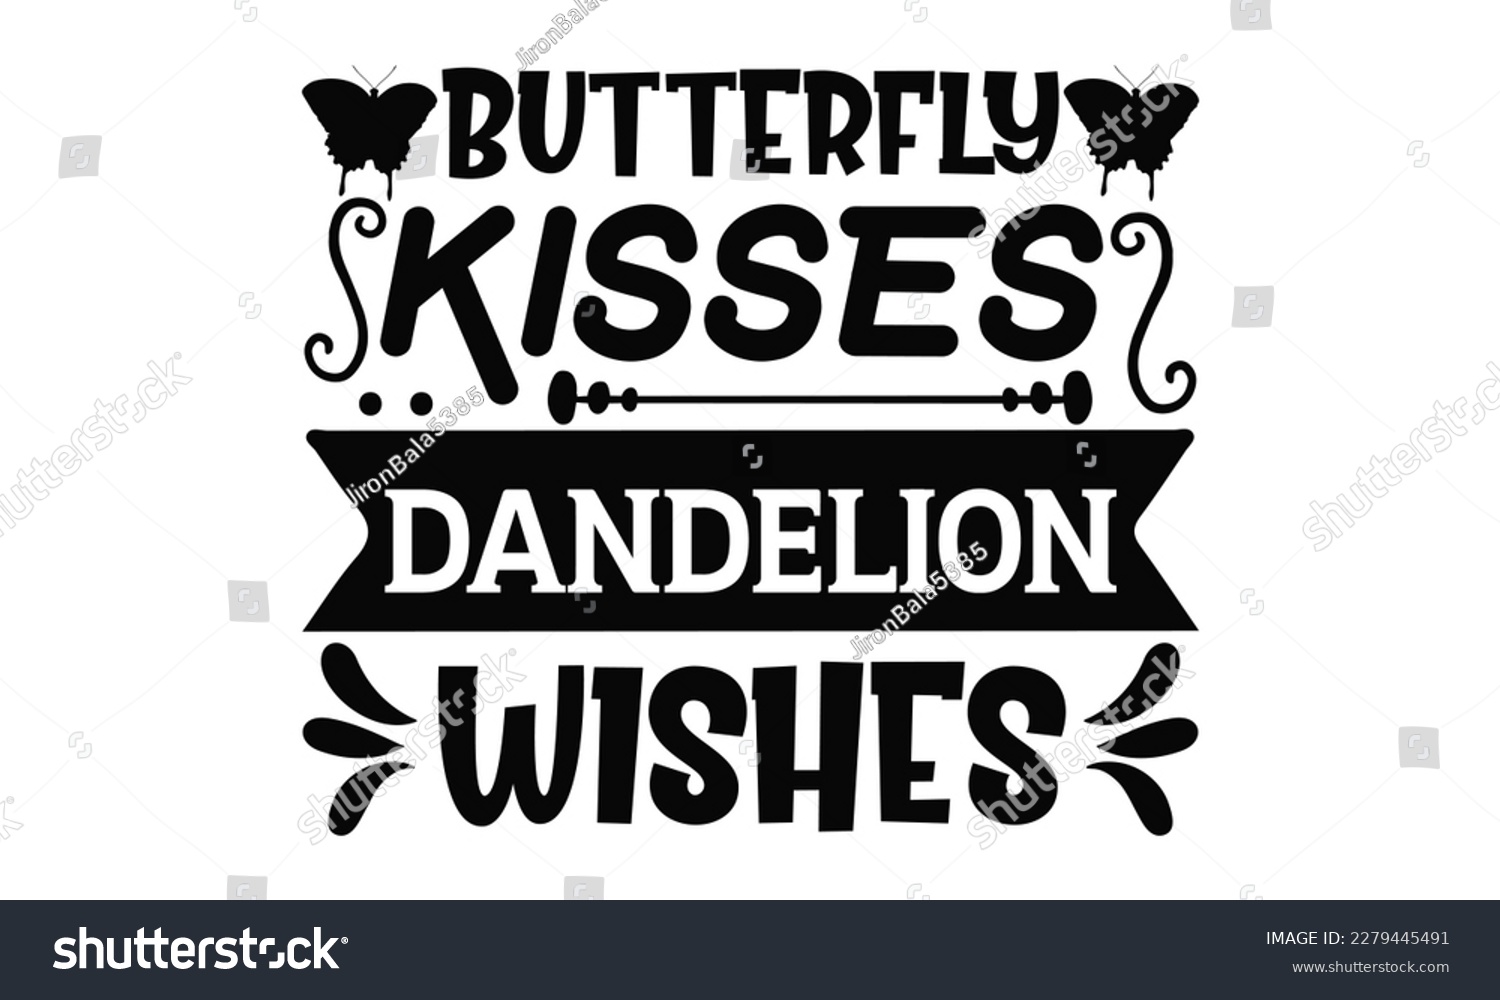 SVG of Butterfly Kisses Dandelion Wishes - Butterfly SVG Design, typography design, this illustration can be used as a print on t-shirts and bags, stationary or as a poster.
 svg